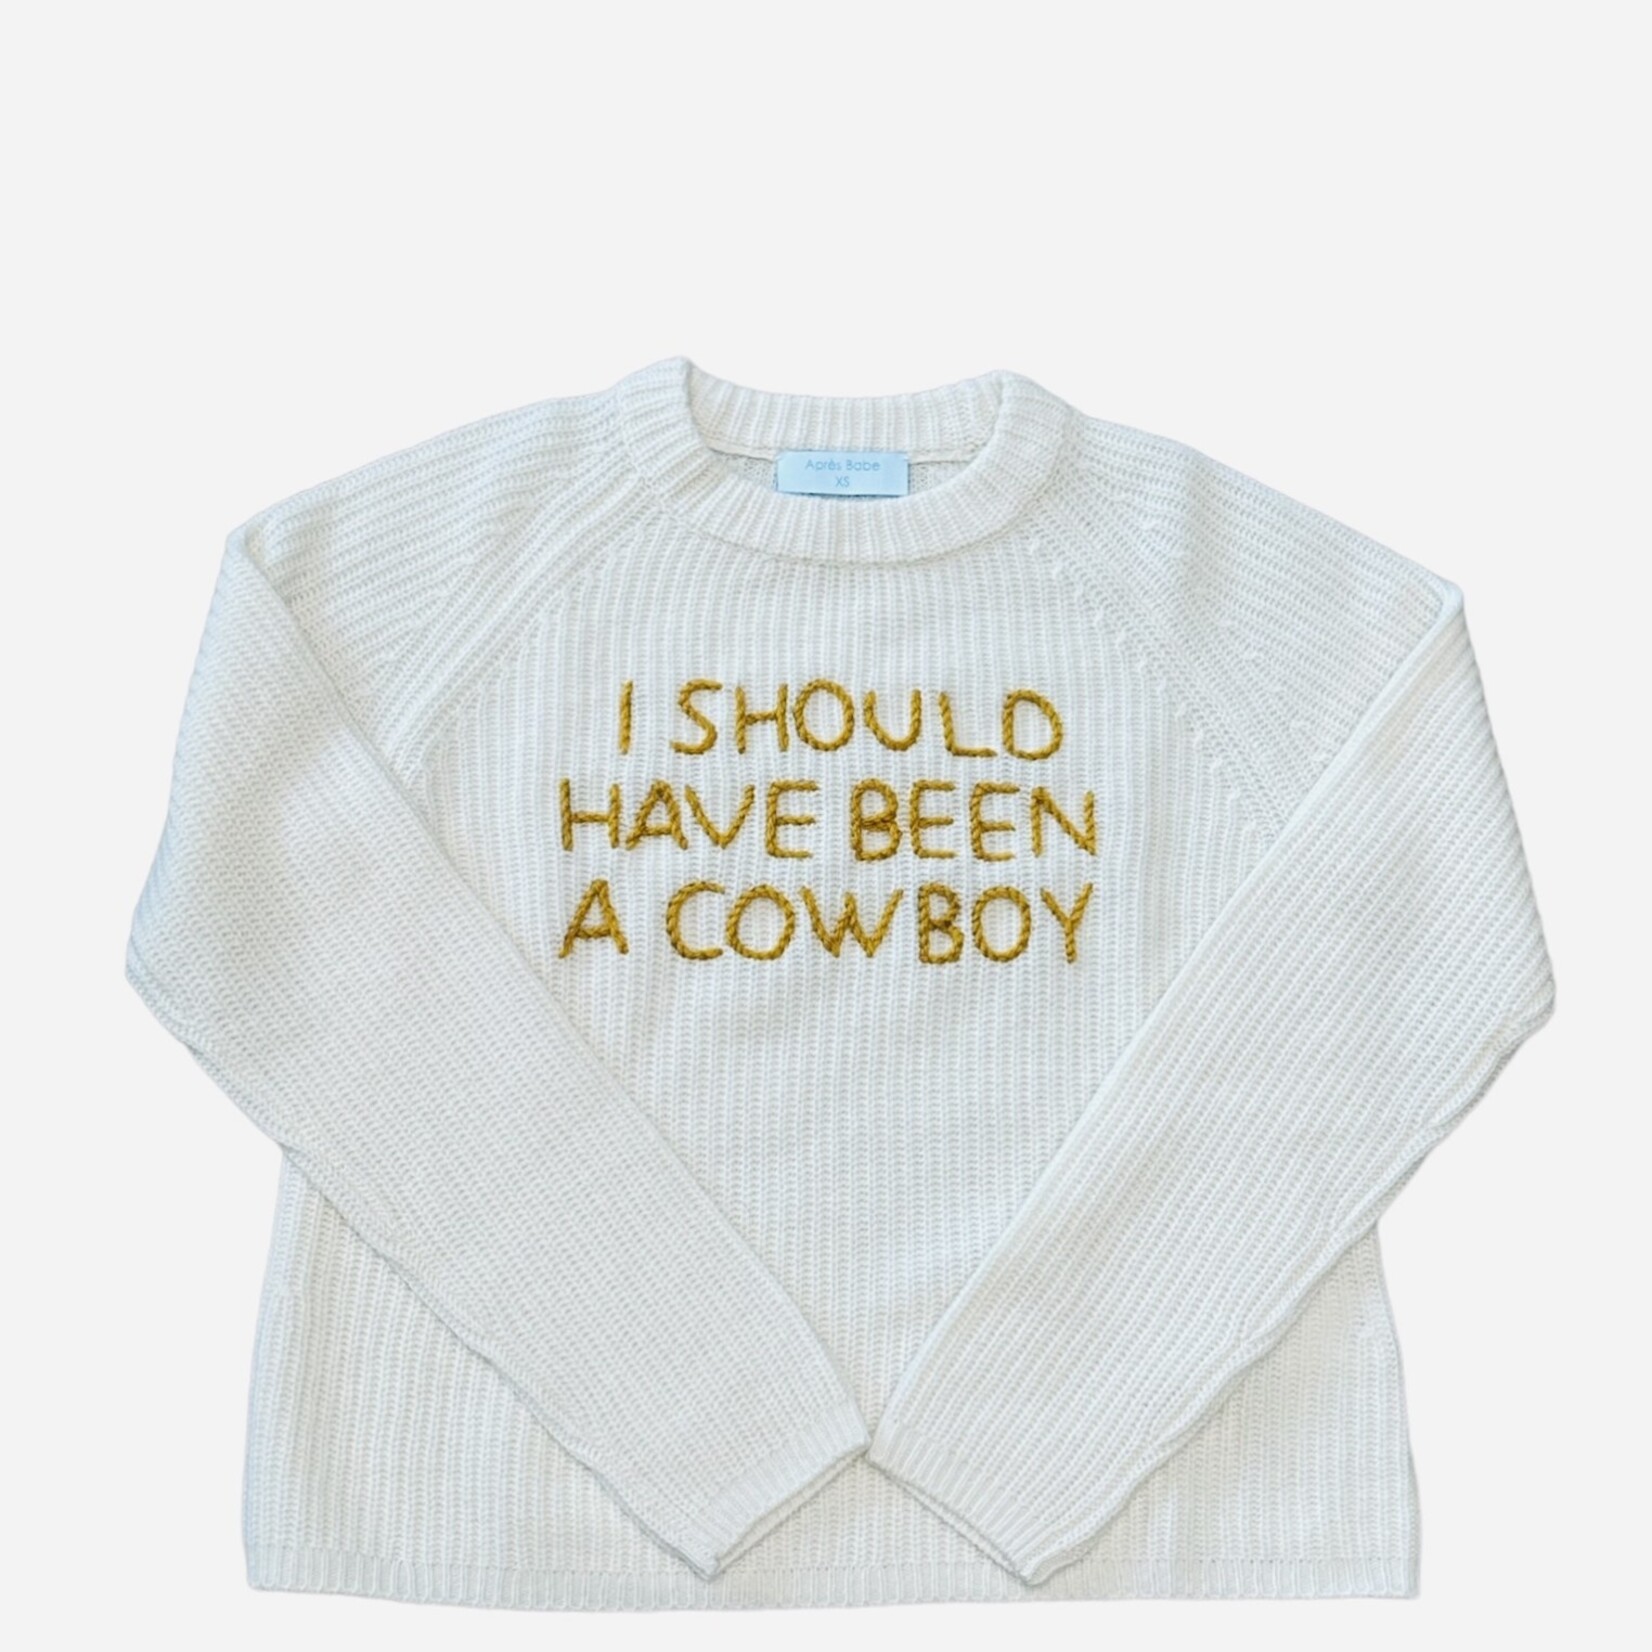 Après Babe Ribbed Cashmere "I SHOULD HAVE BEEN A COWBOY" Sweater